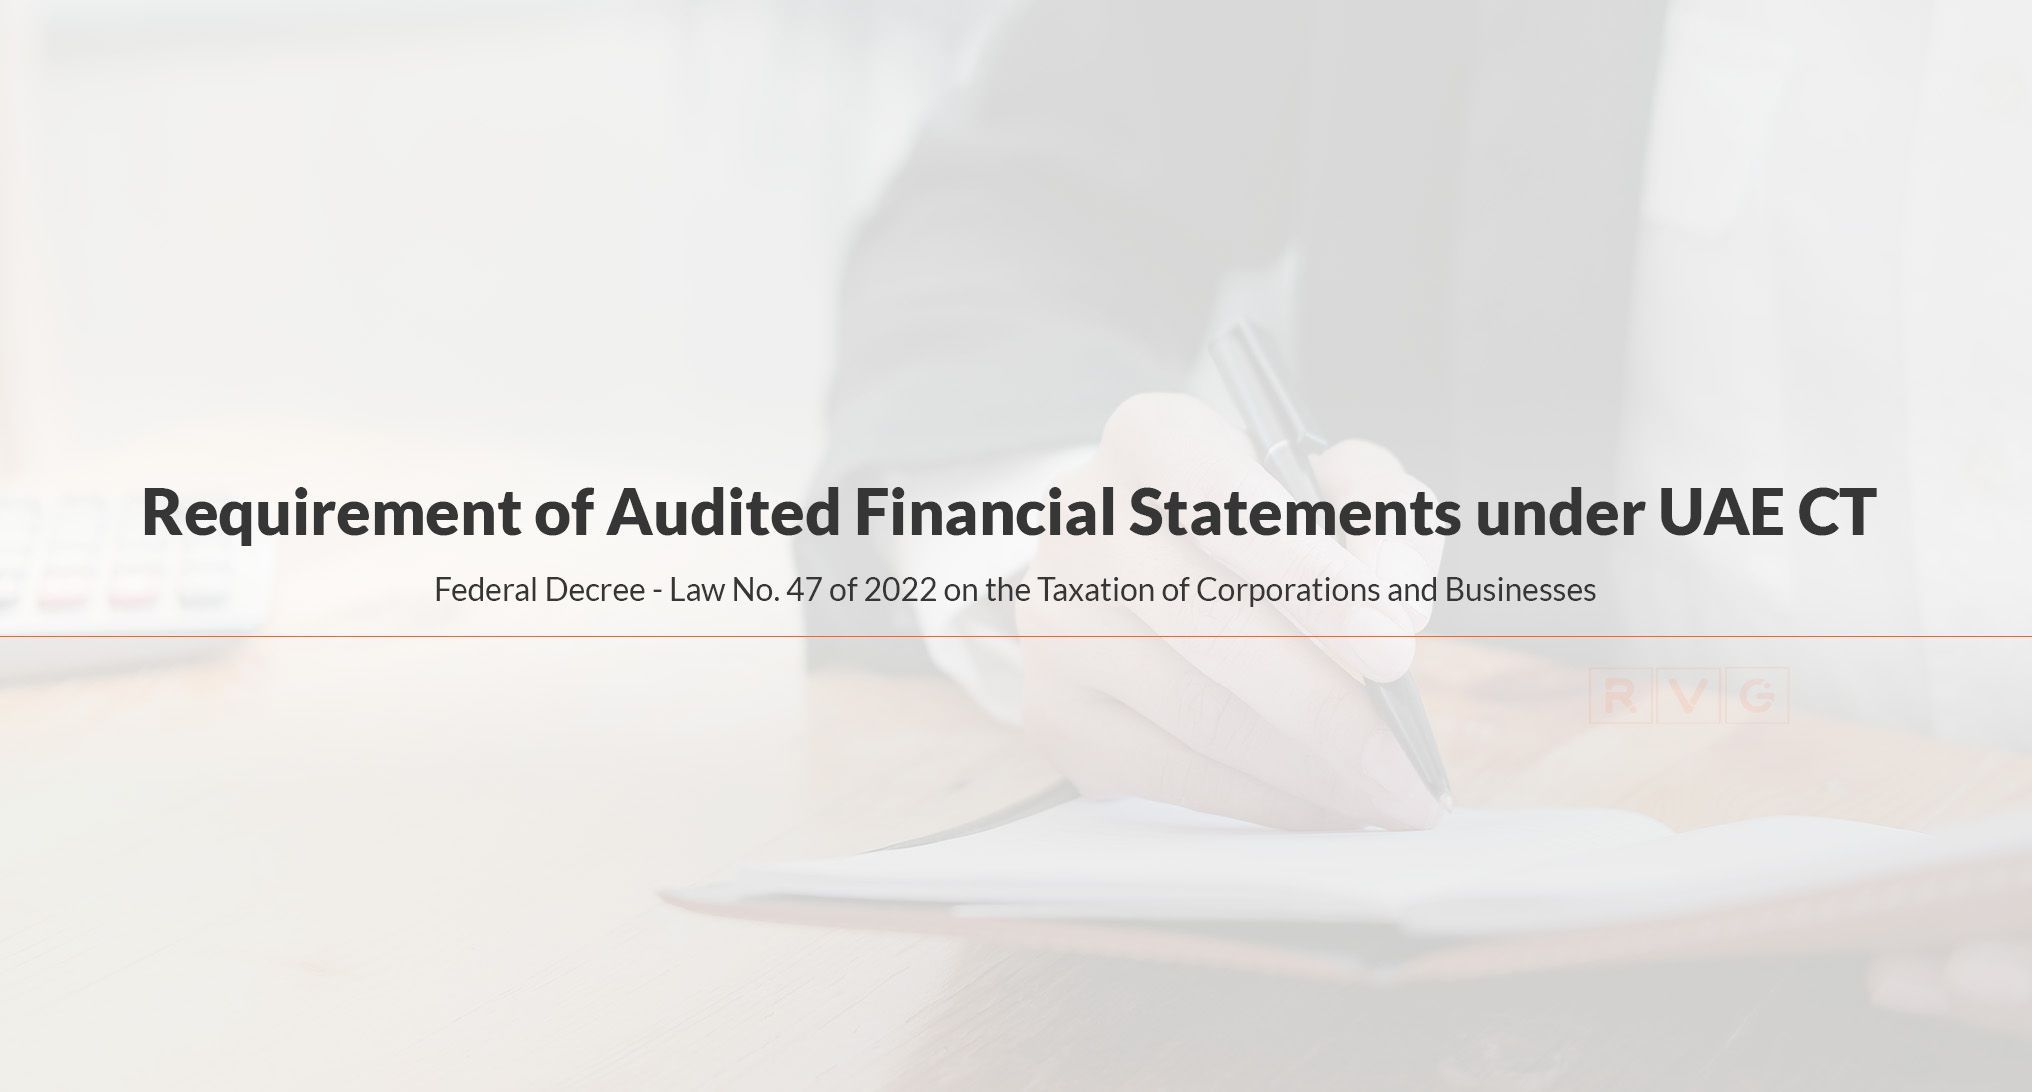 Requirement of Audited Financial Statements under UAE CT